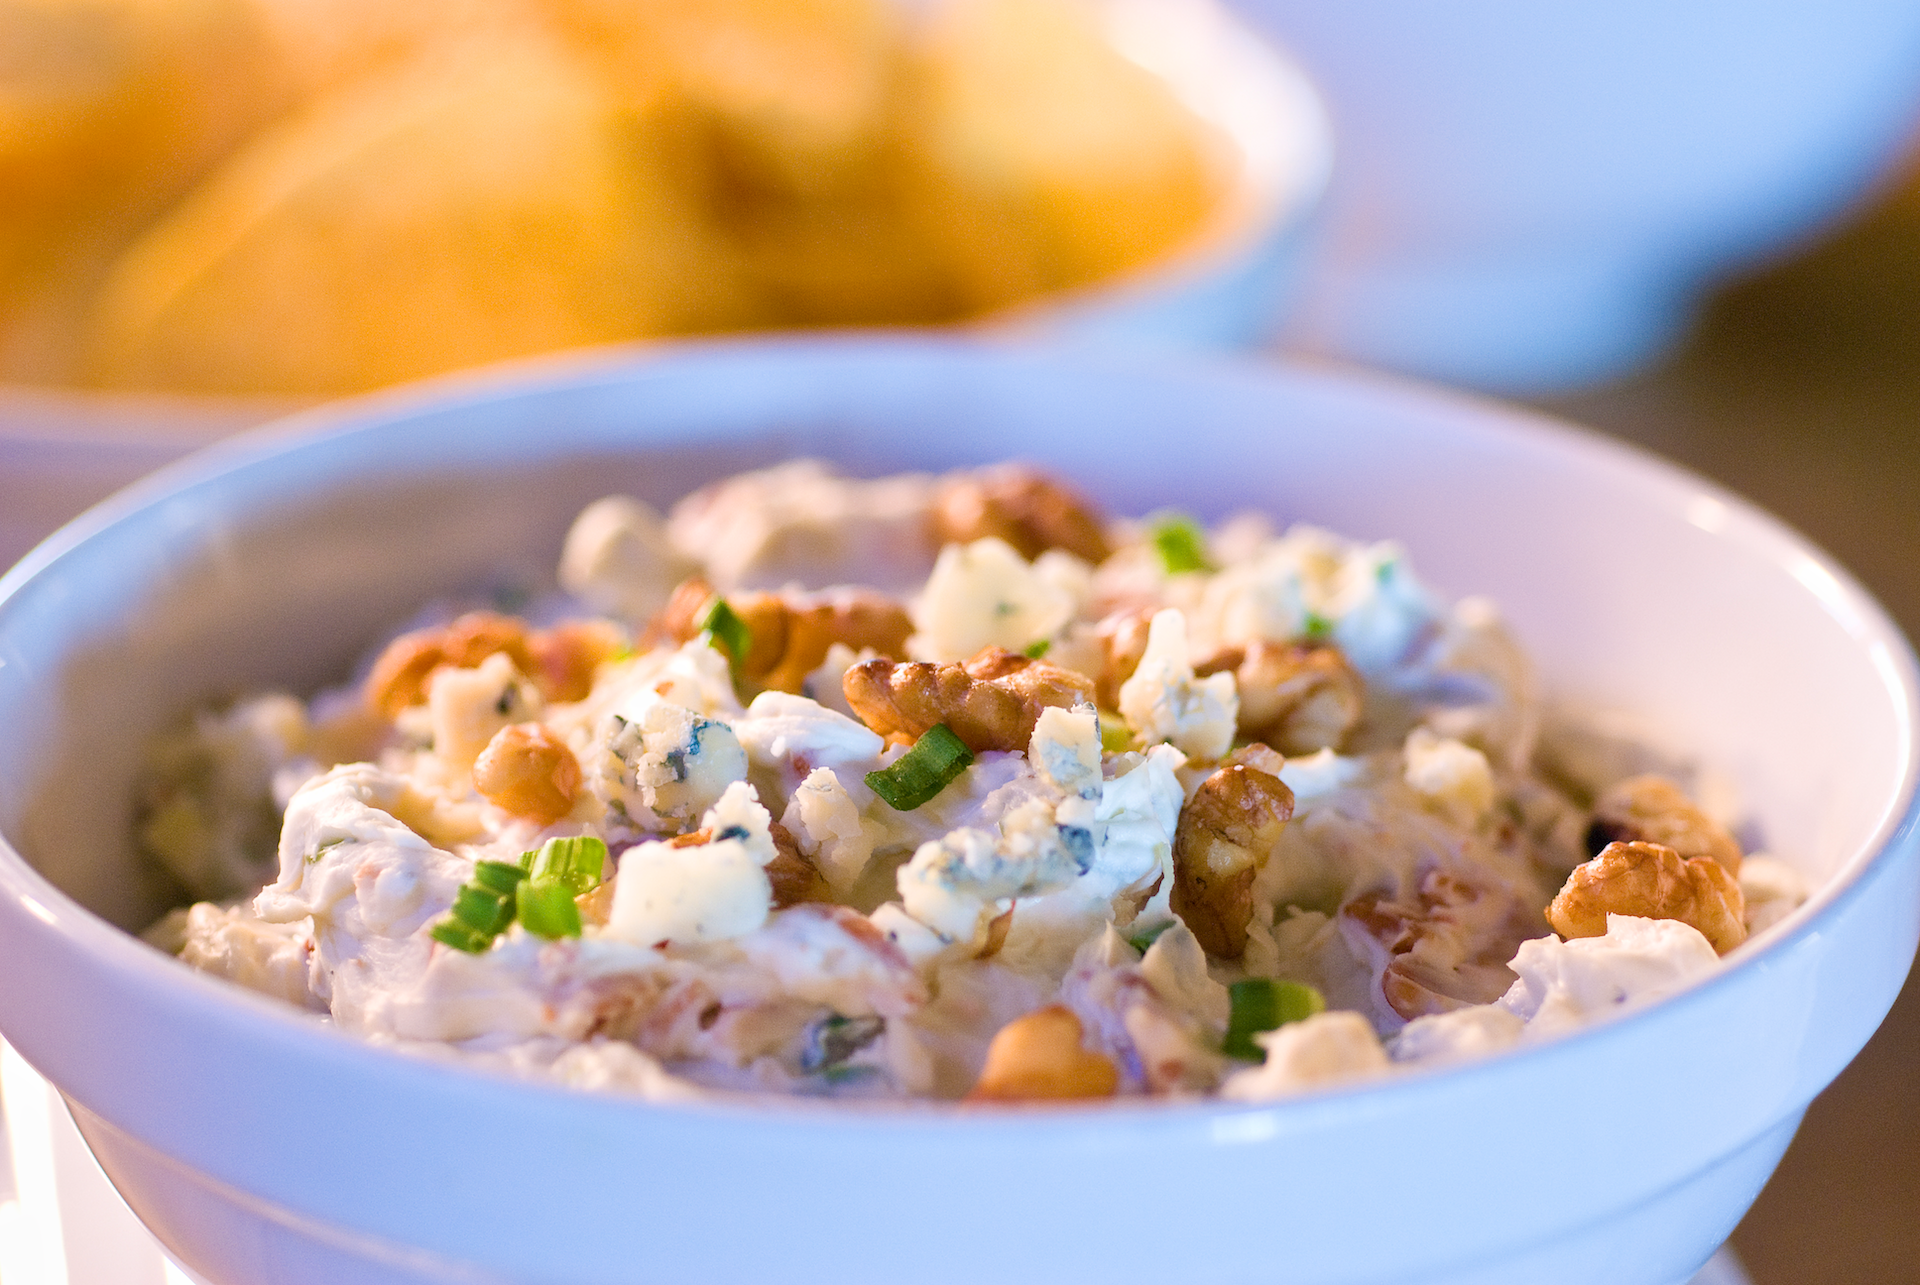 This macho dip requires a thick, sturdy chip! It is bursting with big bold flavors of smoky-sweet bacon, crumbled bits of tangy blue cheese and toasted walnuts. Serve it up warm with crunchy kettle-cooked potato chips. 